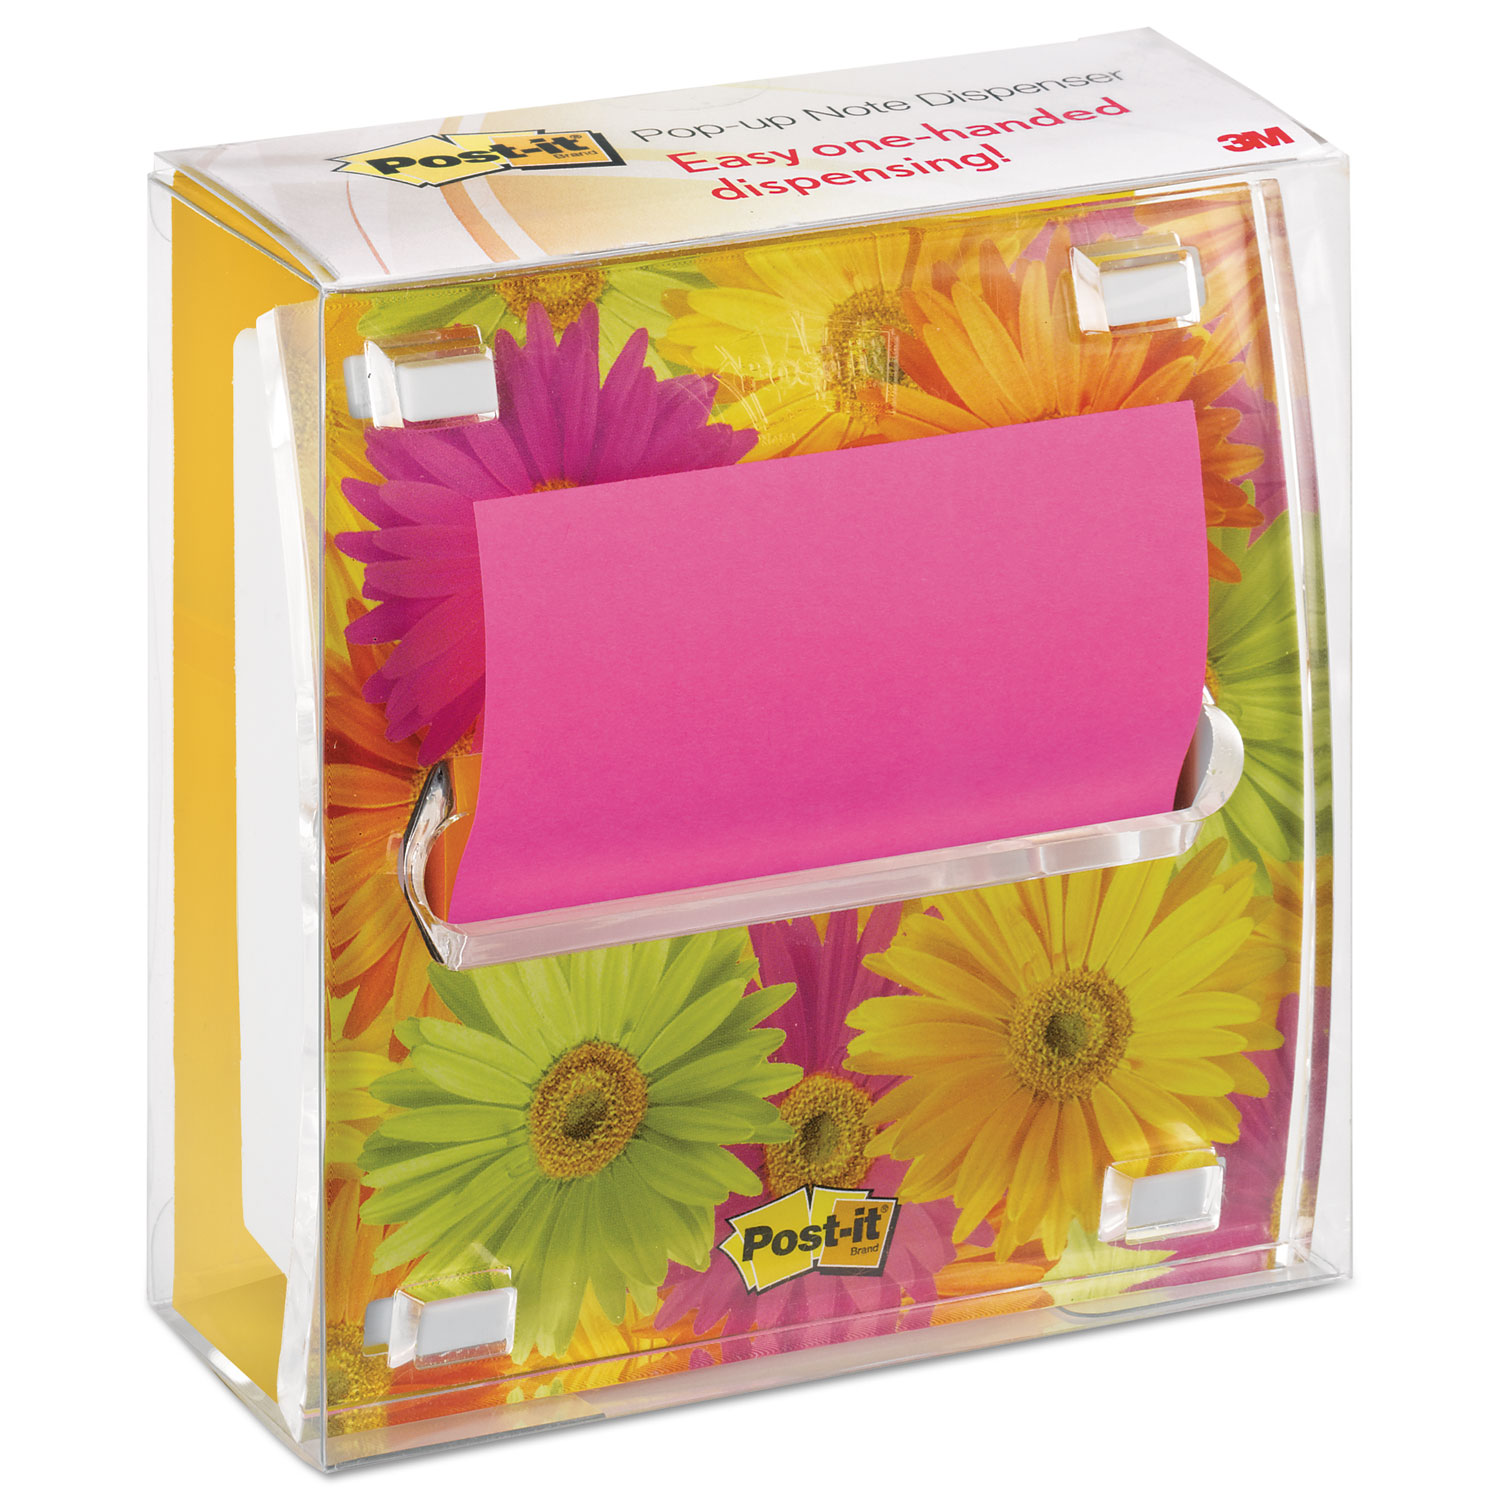 Pop-up Note Dispenser with Designer Daisy Insert, One 45-Sheet Pad, Black/Clear